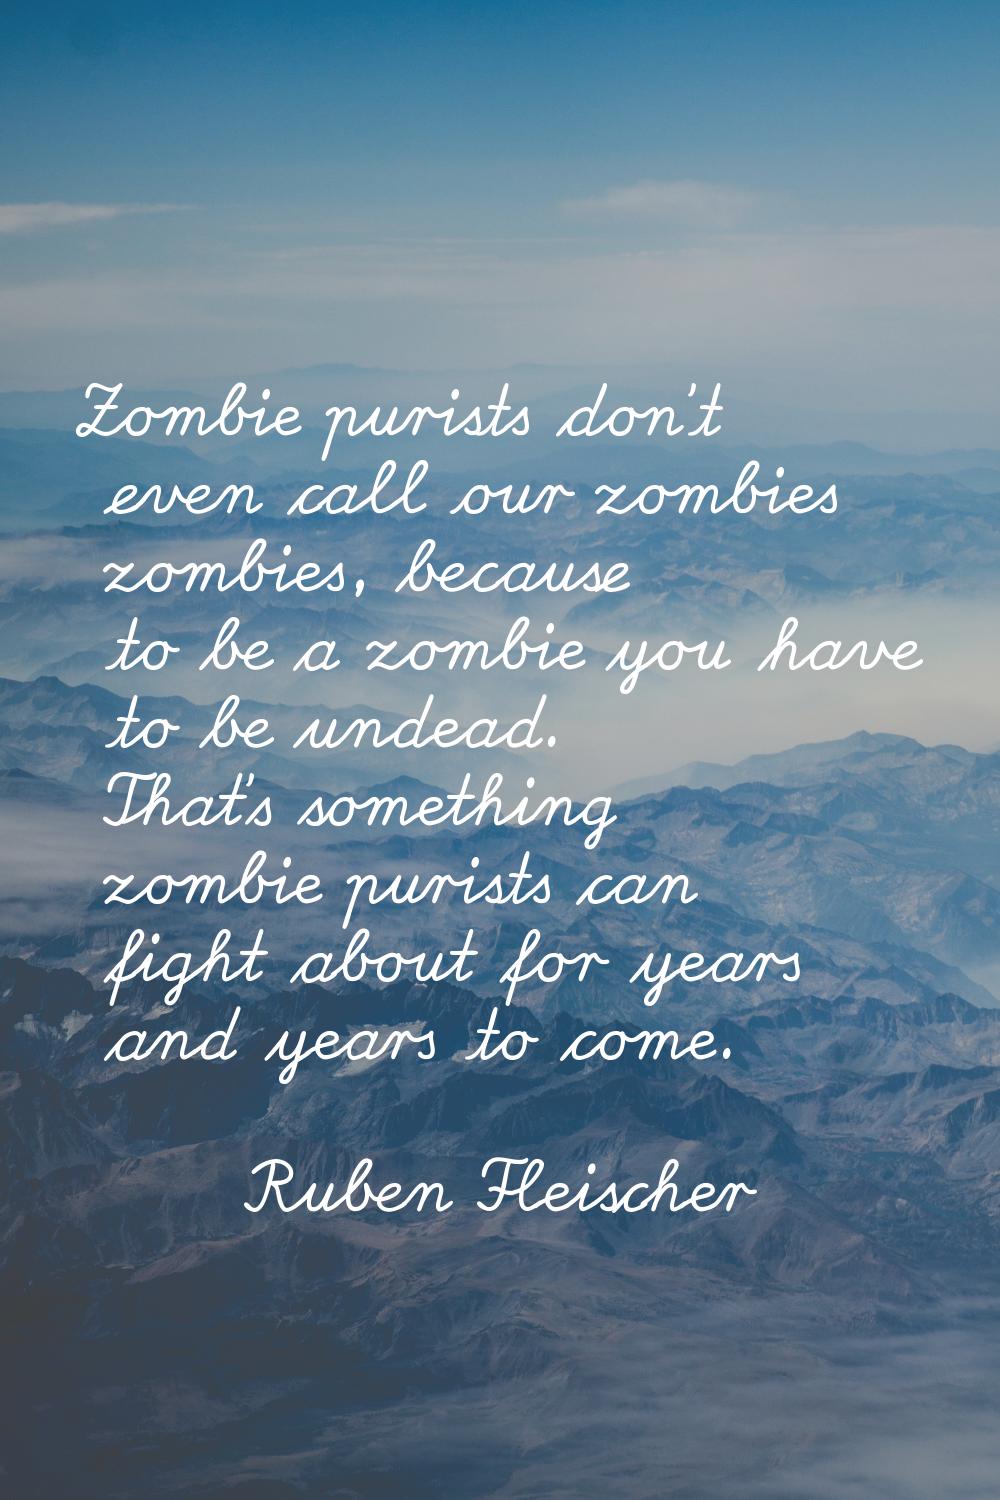 Zombie purists don't even call our zombies zombies, because to be a zombie you have to be undead. T